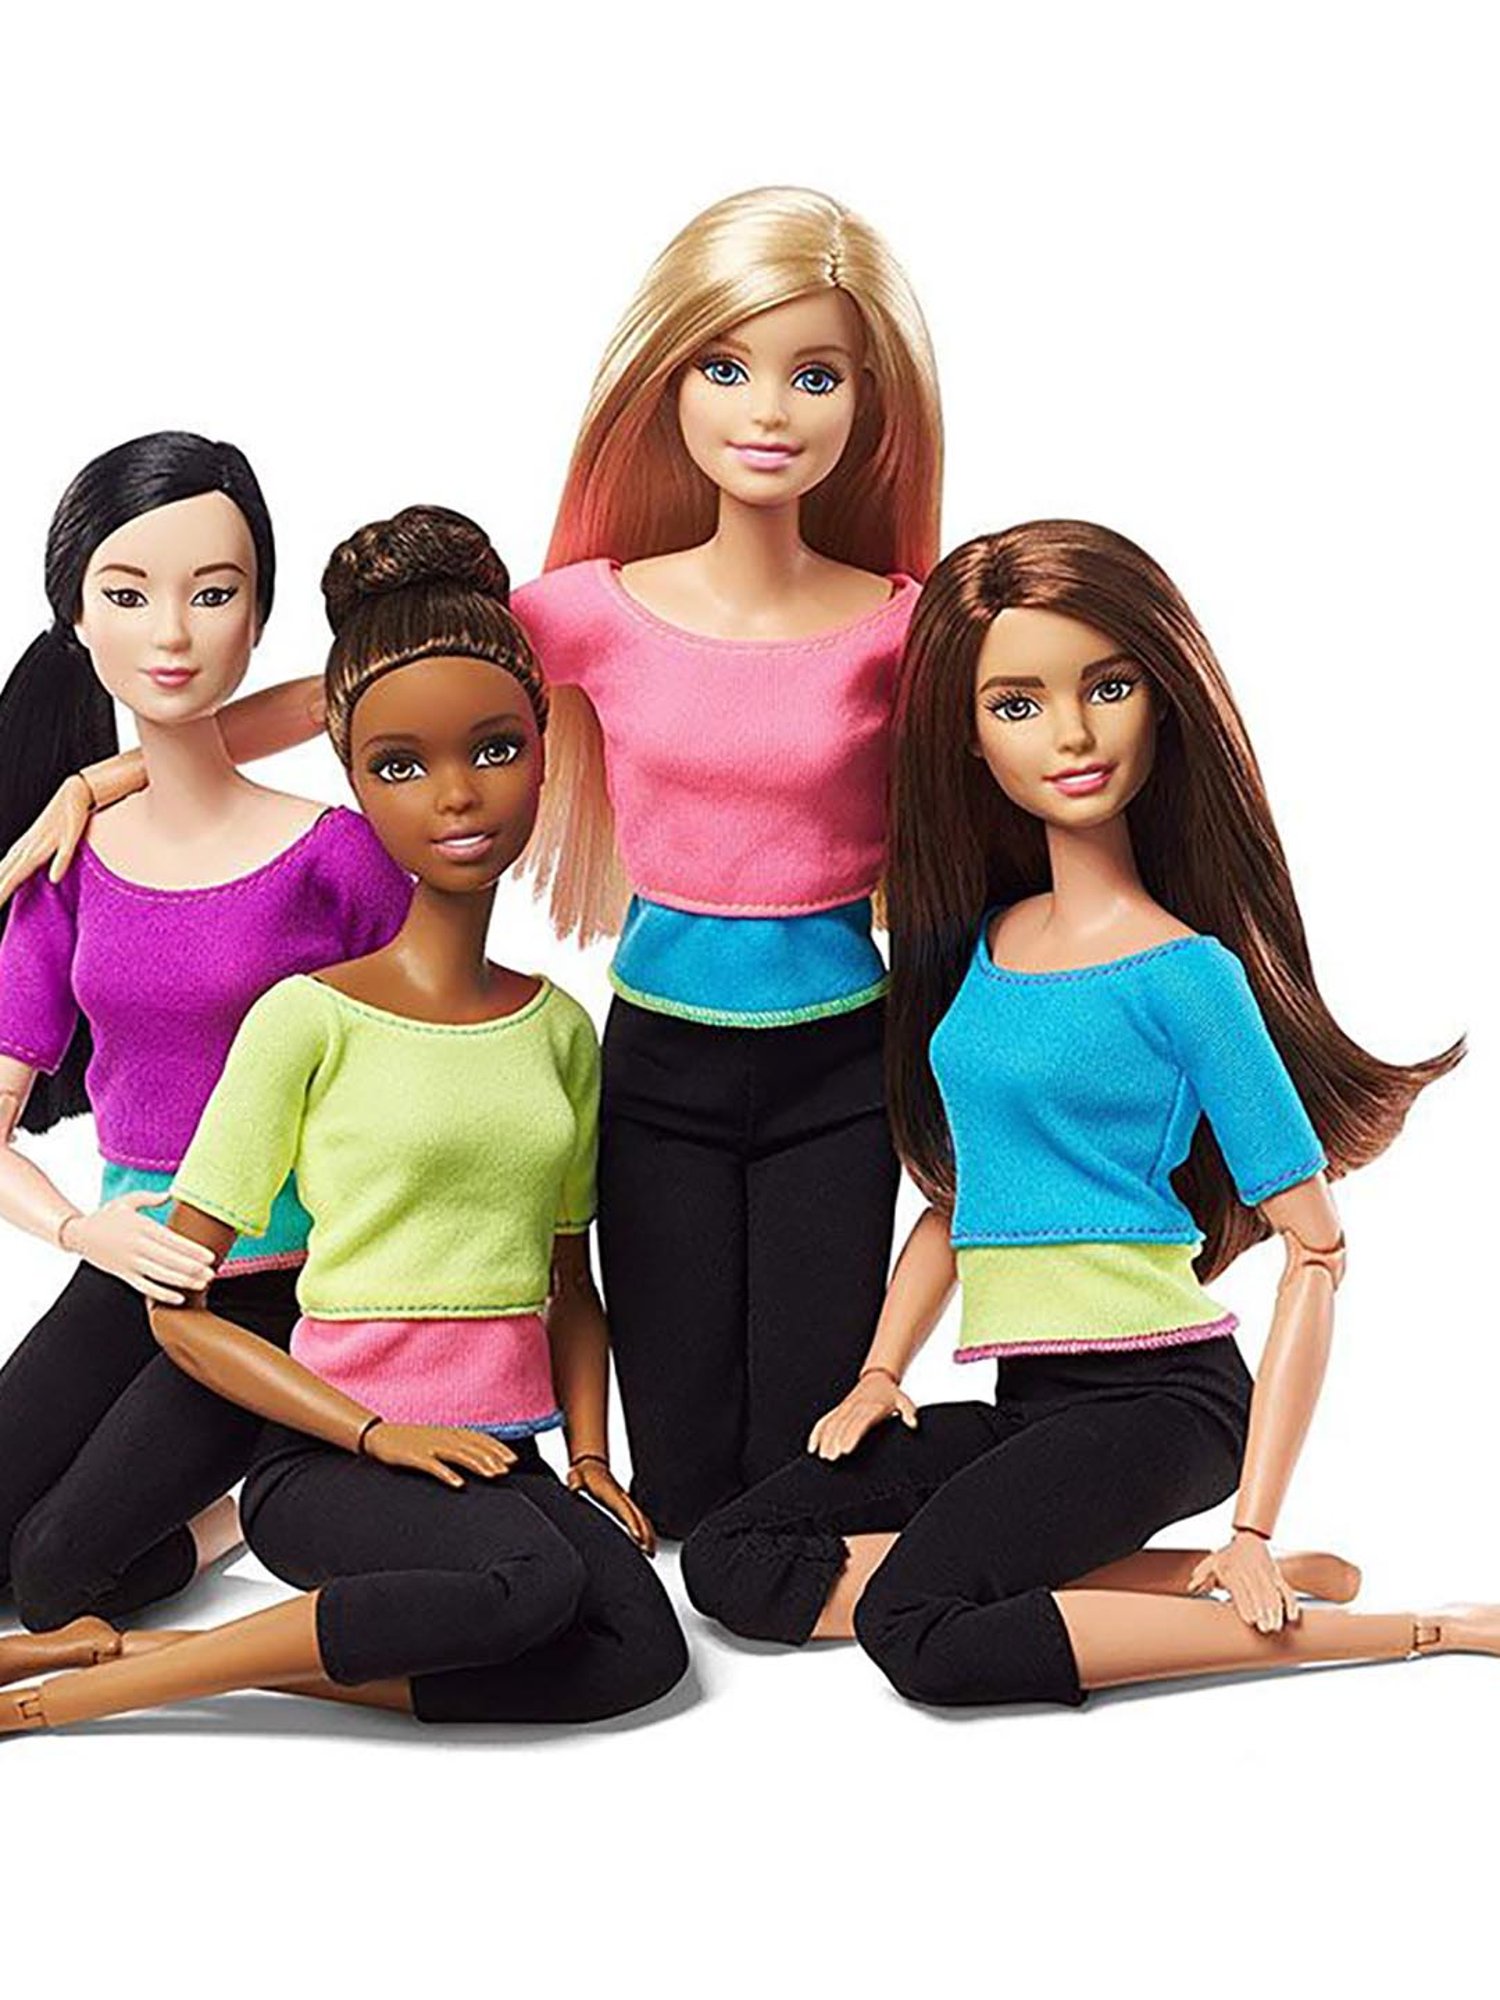 Barbie Made To Move Doll at Rs 1499/piece, Jaipur